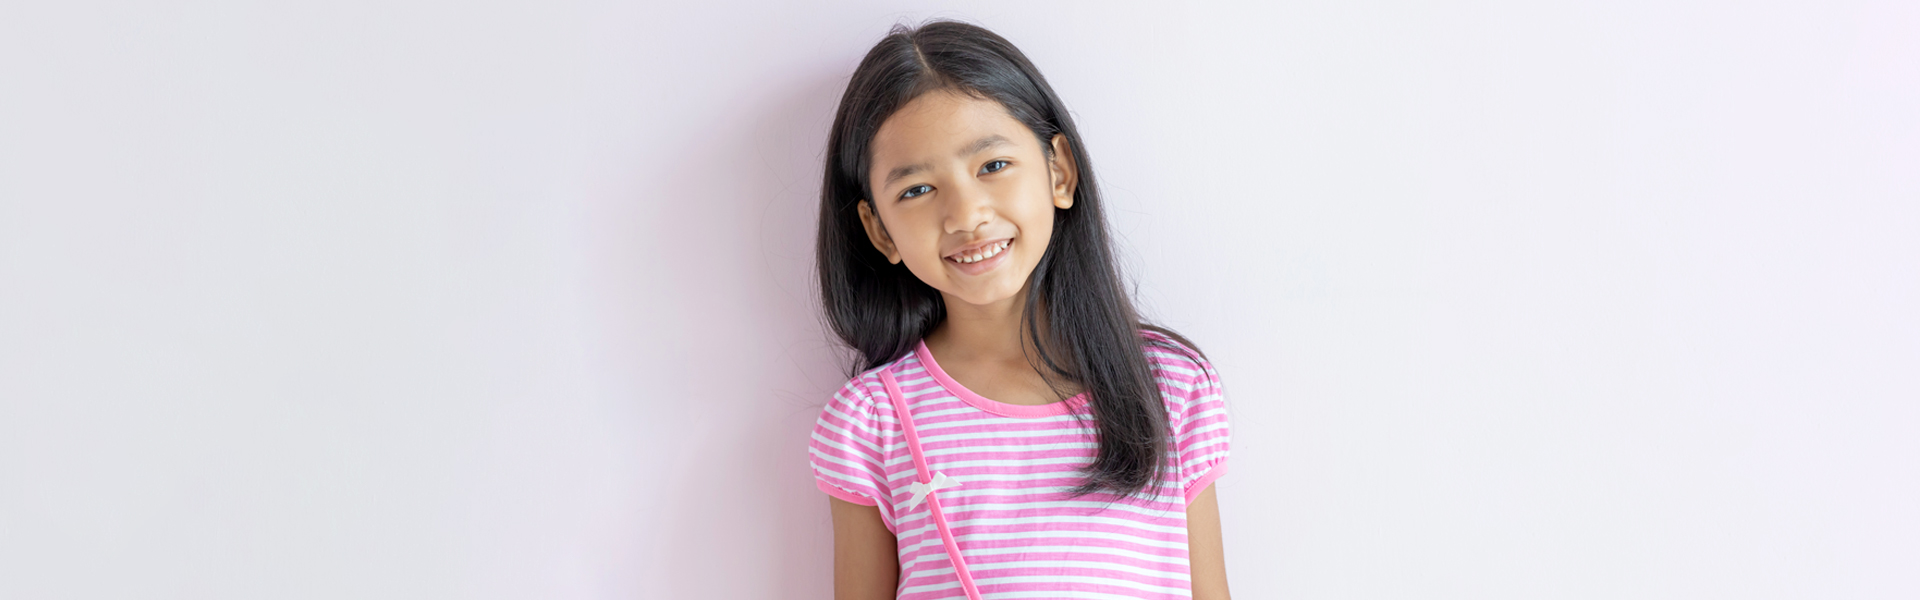 How Should You Know If a Cavity Has Already Started in a Child’s Teeth?